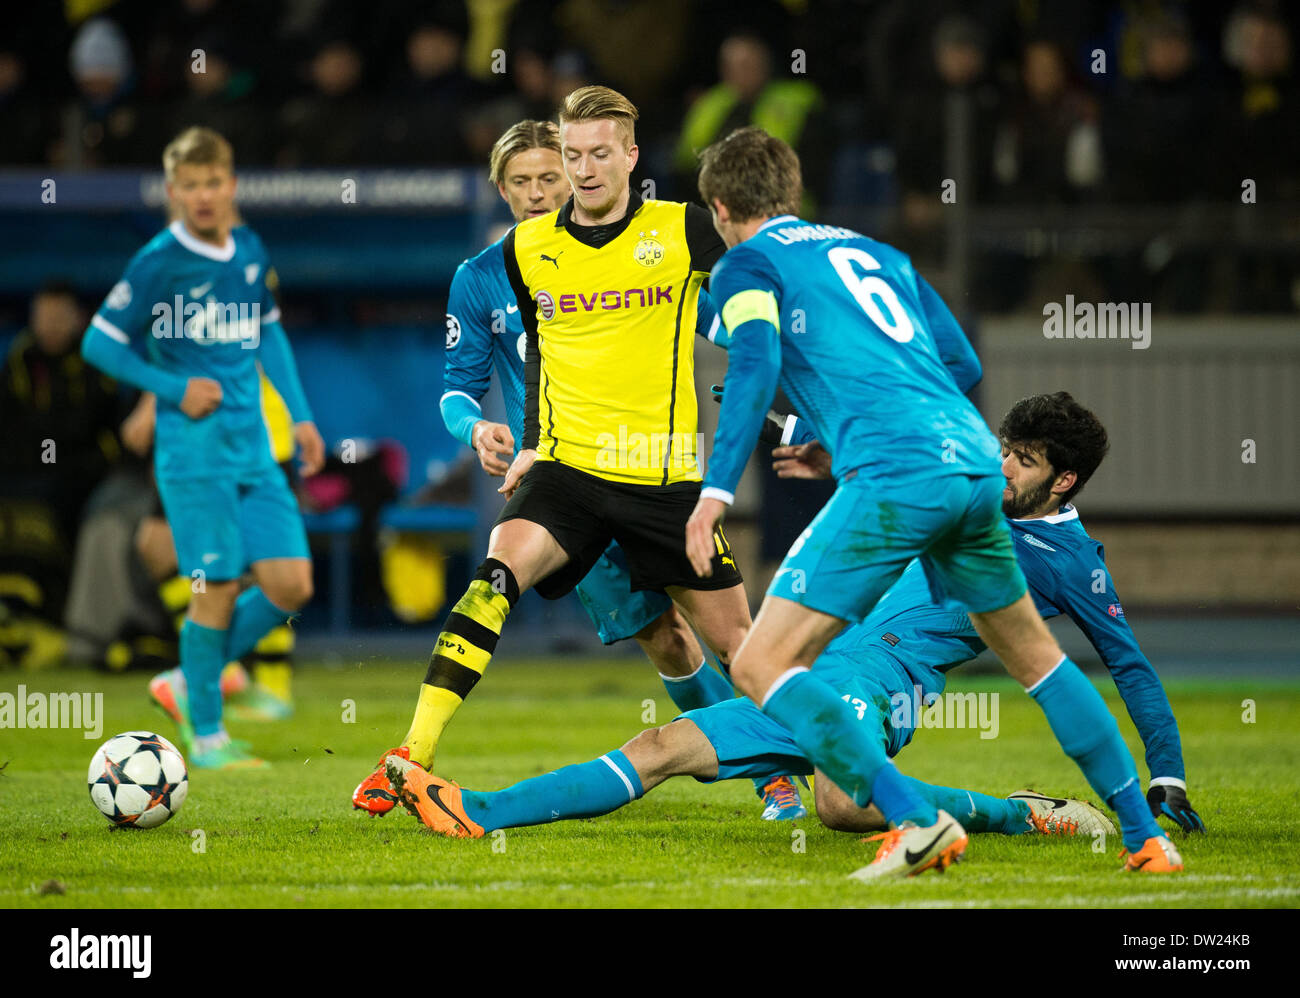 St. Peterburg, Russia. 25th Feb, 2014. Dortmund's Marco Reus (C) vies for the Ball with Zenit's Anatoliy Tymoshchuk (L-R), Nicolas Lombaerts and Luis Neto during the UEFA Champions League round of 16 first leg soccer match between Zenit St. Petersburg and Borussia Dortmund at Petrowski stadium in St. Peterburg, Russia, 25 February 2014. Borussia Dortmund are well placed to reach the quarter-finals of the Champions League after an emphatic 4-2 win at Zenit Saint Petersburg. Photo: Bernd Thissen/dpa/Alamy Live News Stock Photo